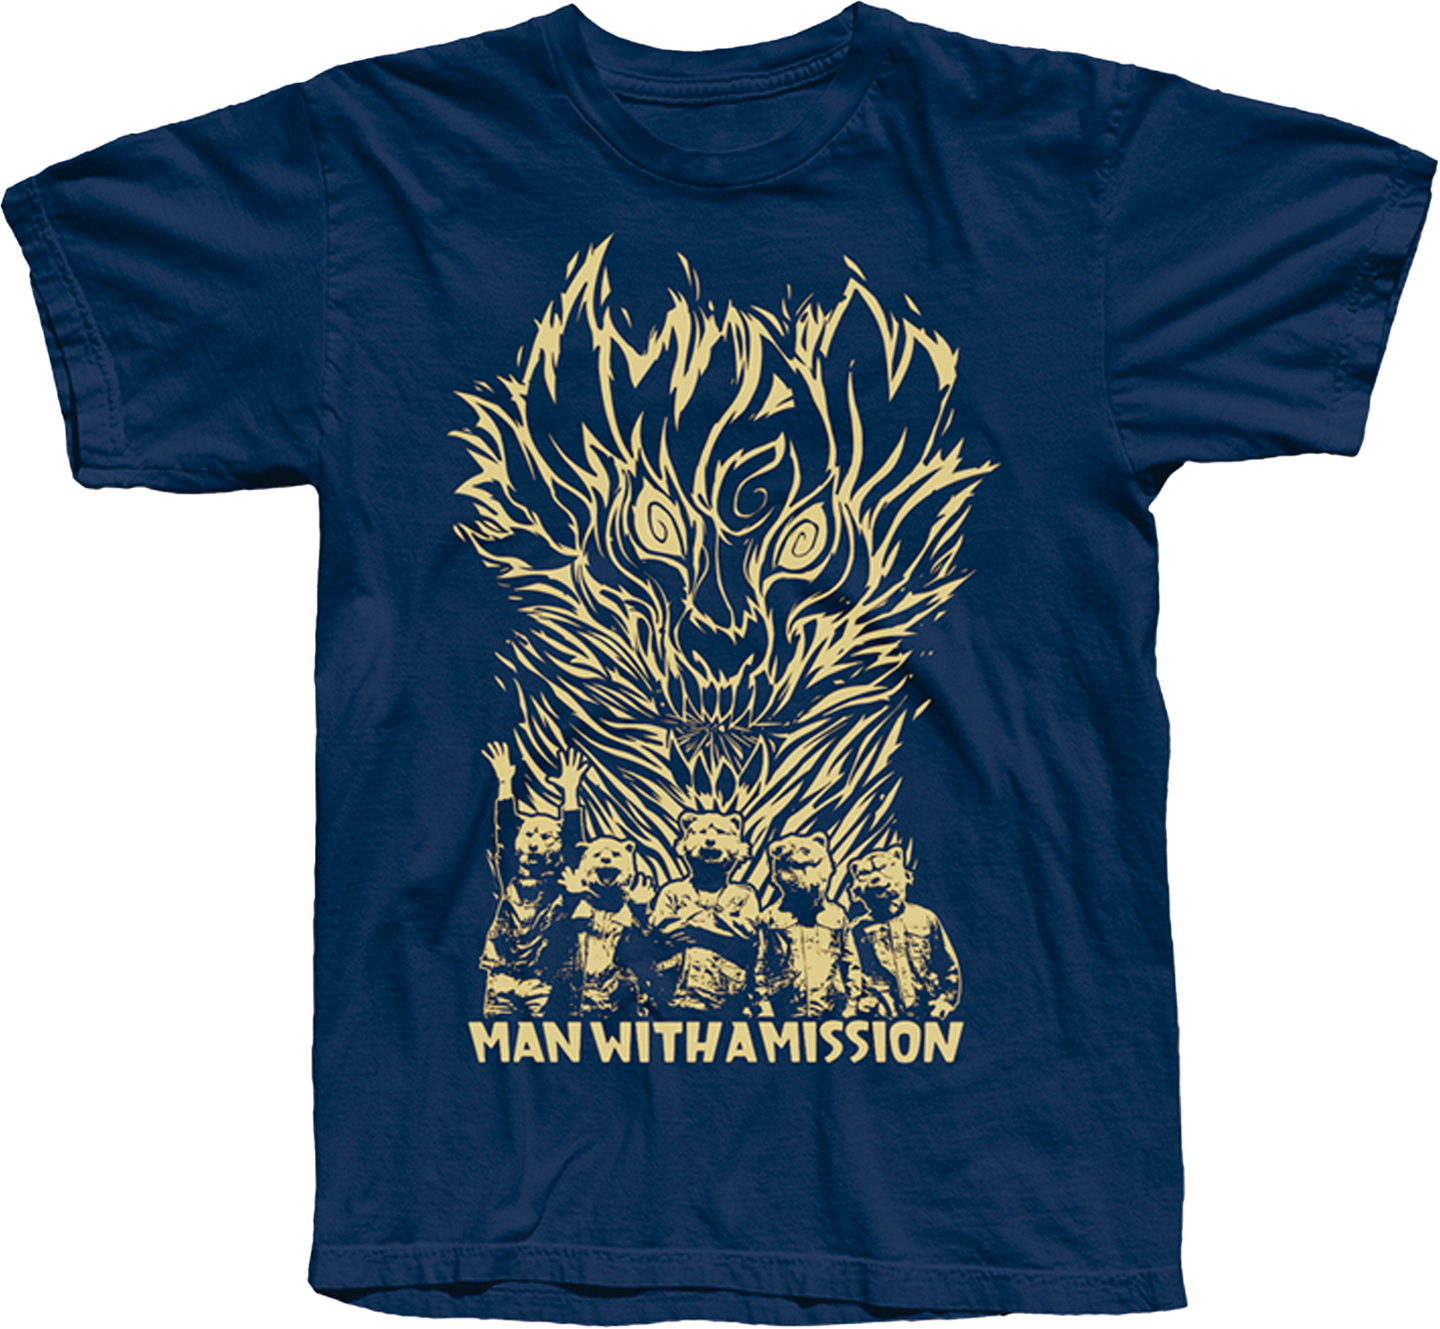 MAN WITH A MISSION 'FIRE' T-SHIRT BLUE MERCHANDISE